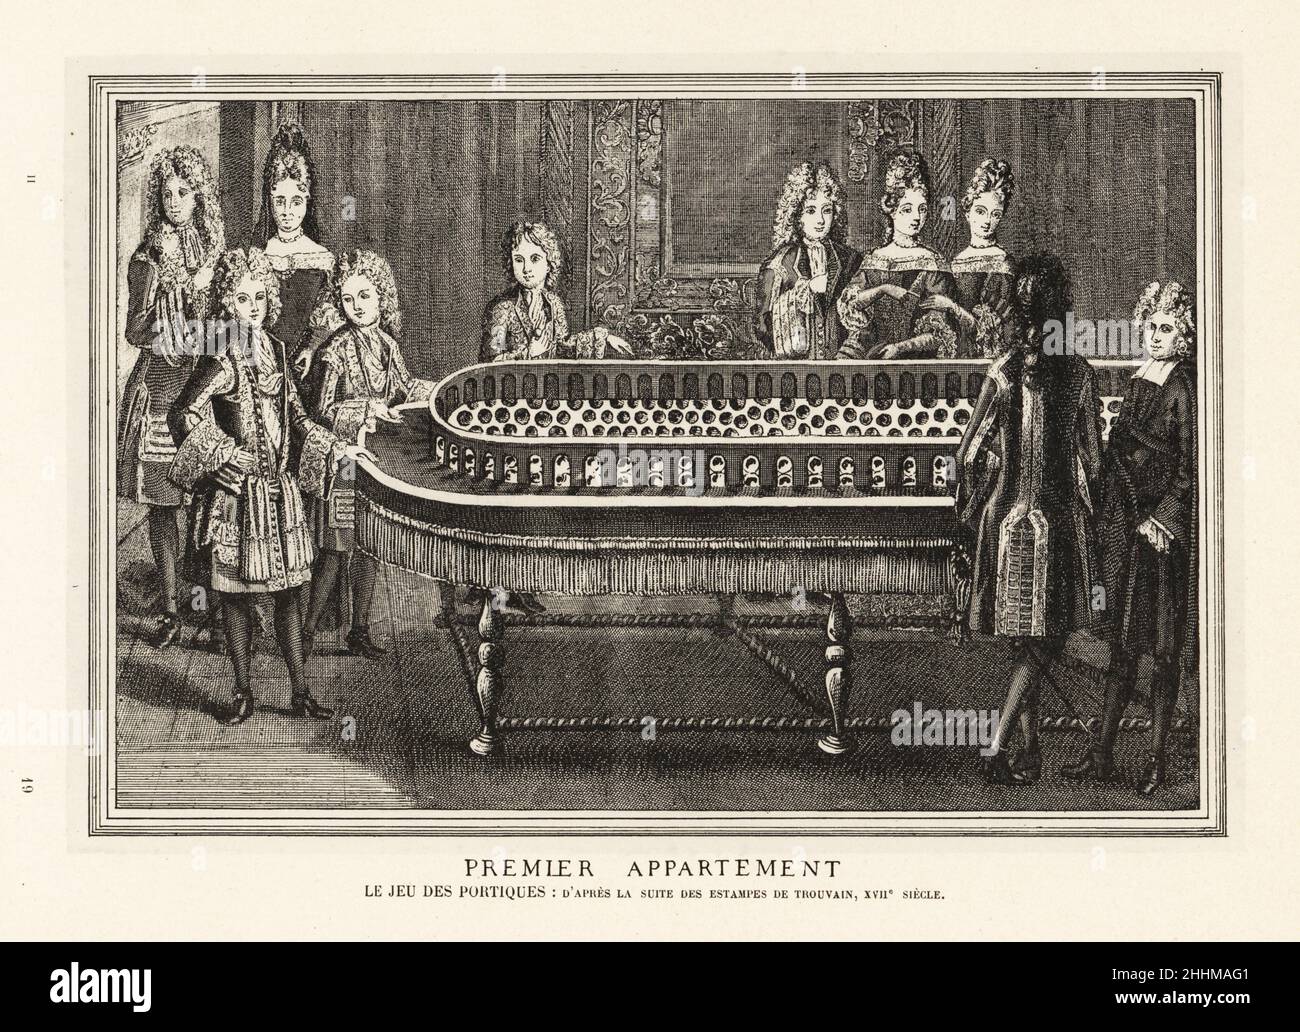 King Louis XIV, family and courtiers playing the game of bagatelle in the First Apartment, Versailles, 1694. Louis XIV, Philippe I, Duke of Anjou, Charles, Duke of Berry, Louis, Grand Dauphin and others After an engraving by Antoine Trouvain. Premier Appartement. Le Jeu de Portiques. Lithograph from Henry Rene d’Allemagne’s Recreations et Passe-Temps, Games and Pastimes, Hachette, Paris, 1906. Stock Photo